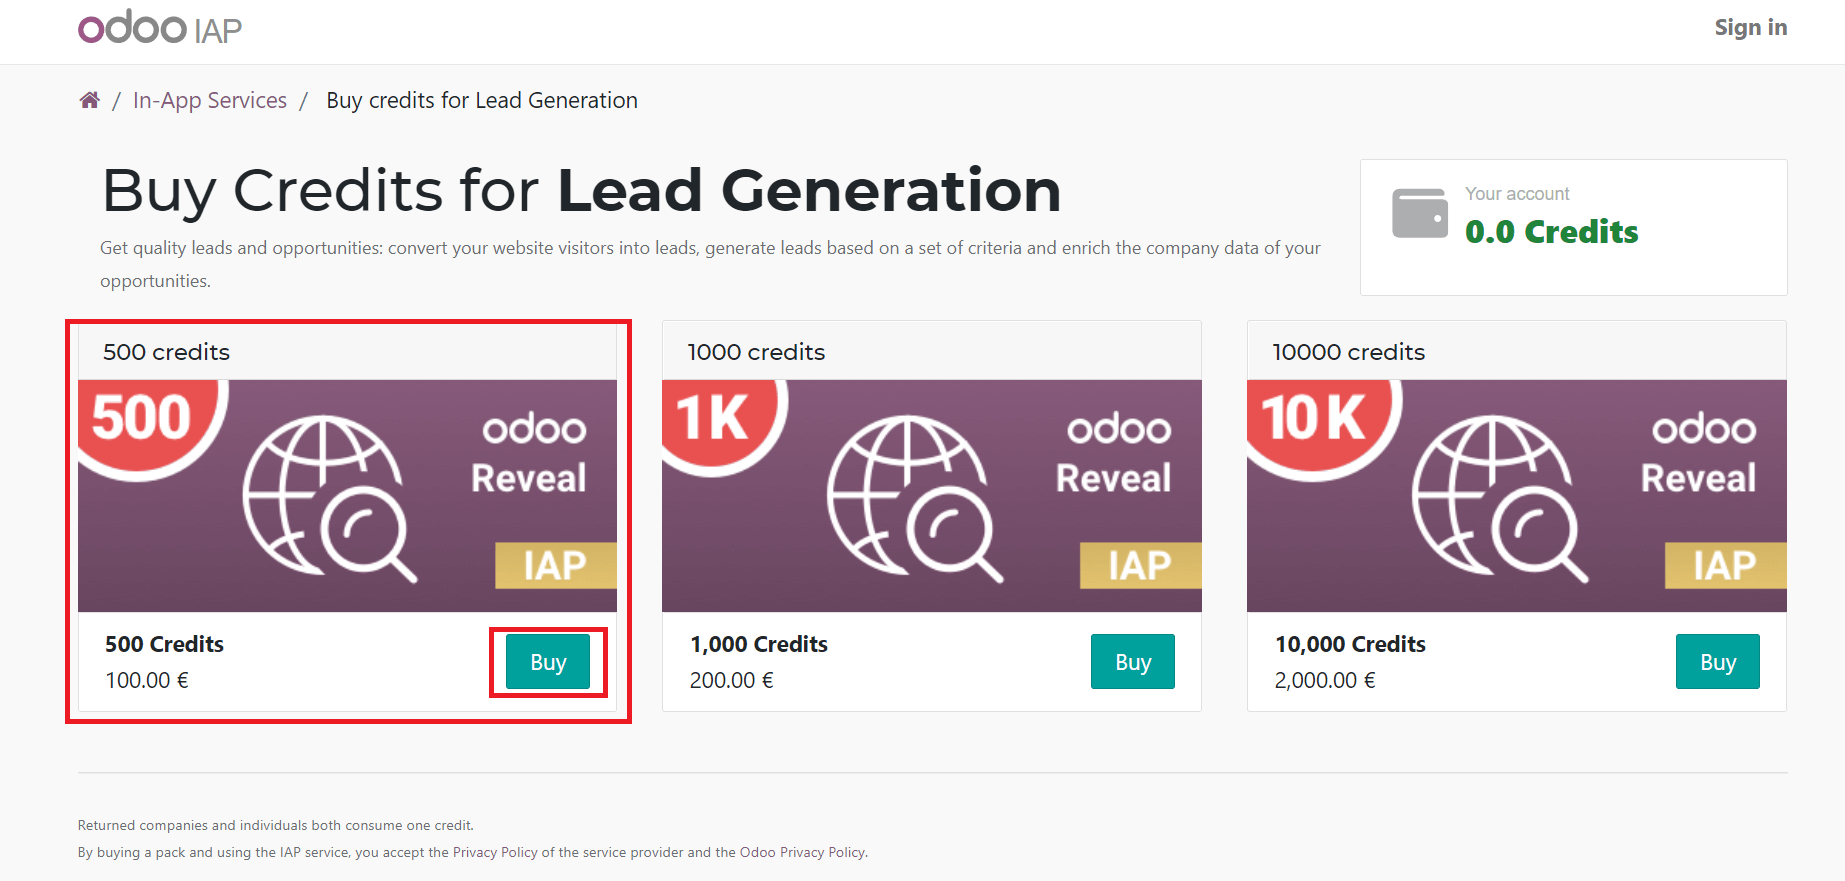 how-to-create-visits-to-lead-rule-in-odoo-16-crm-1-cybrosys